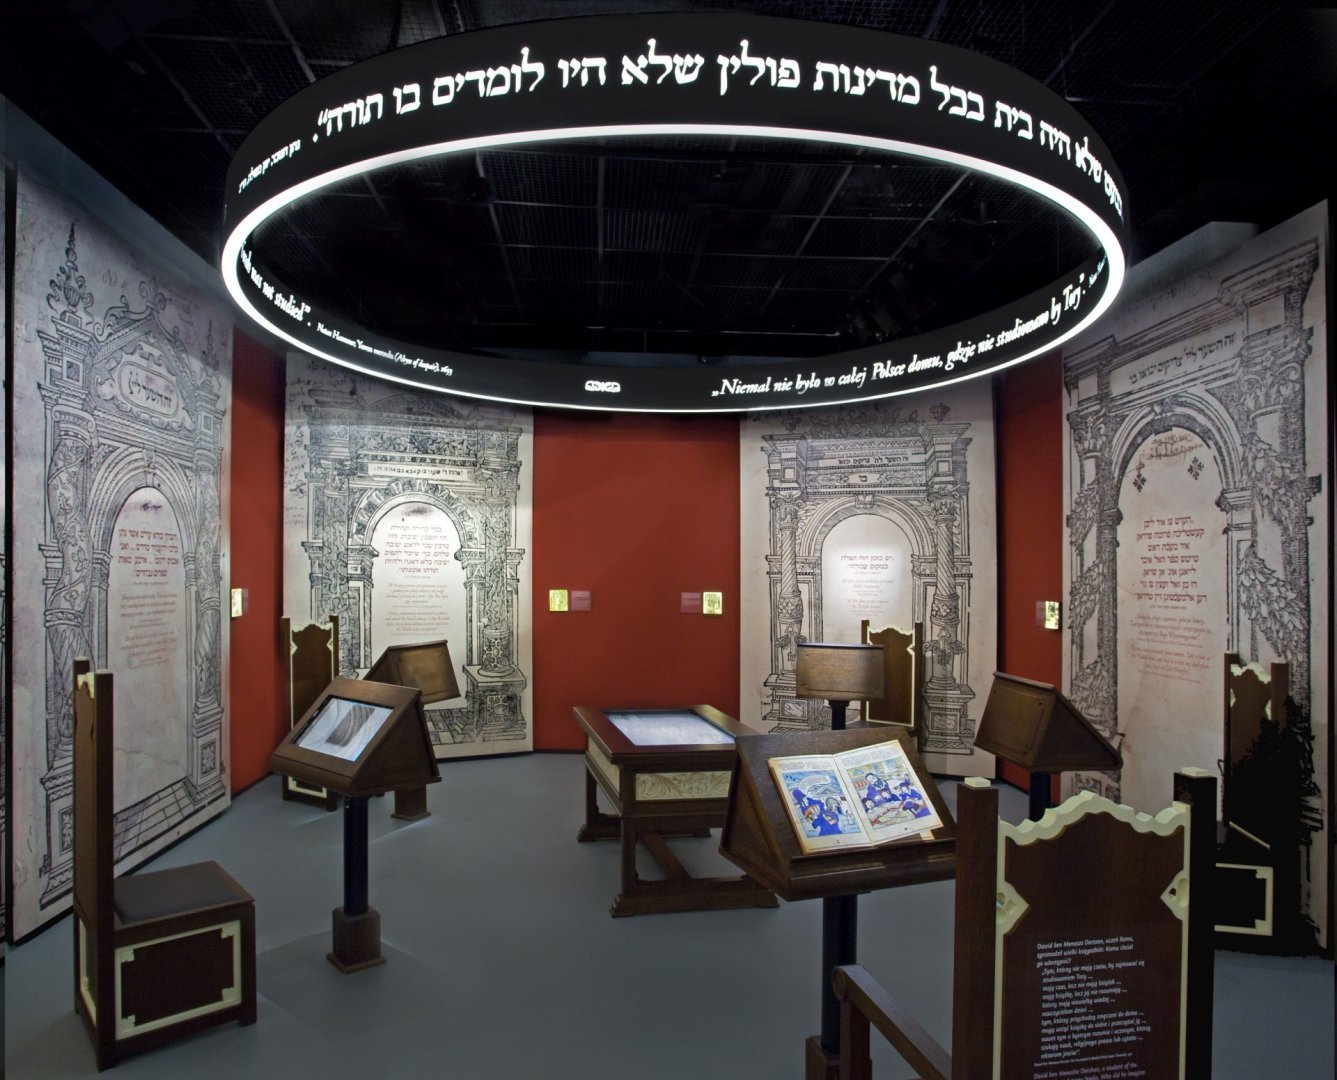 Jewish tourist attractions and memorial sites in Poland